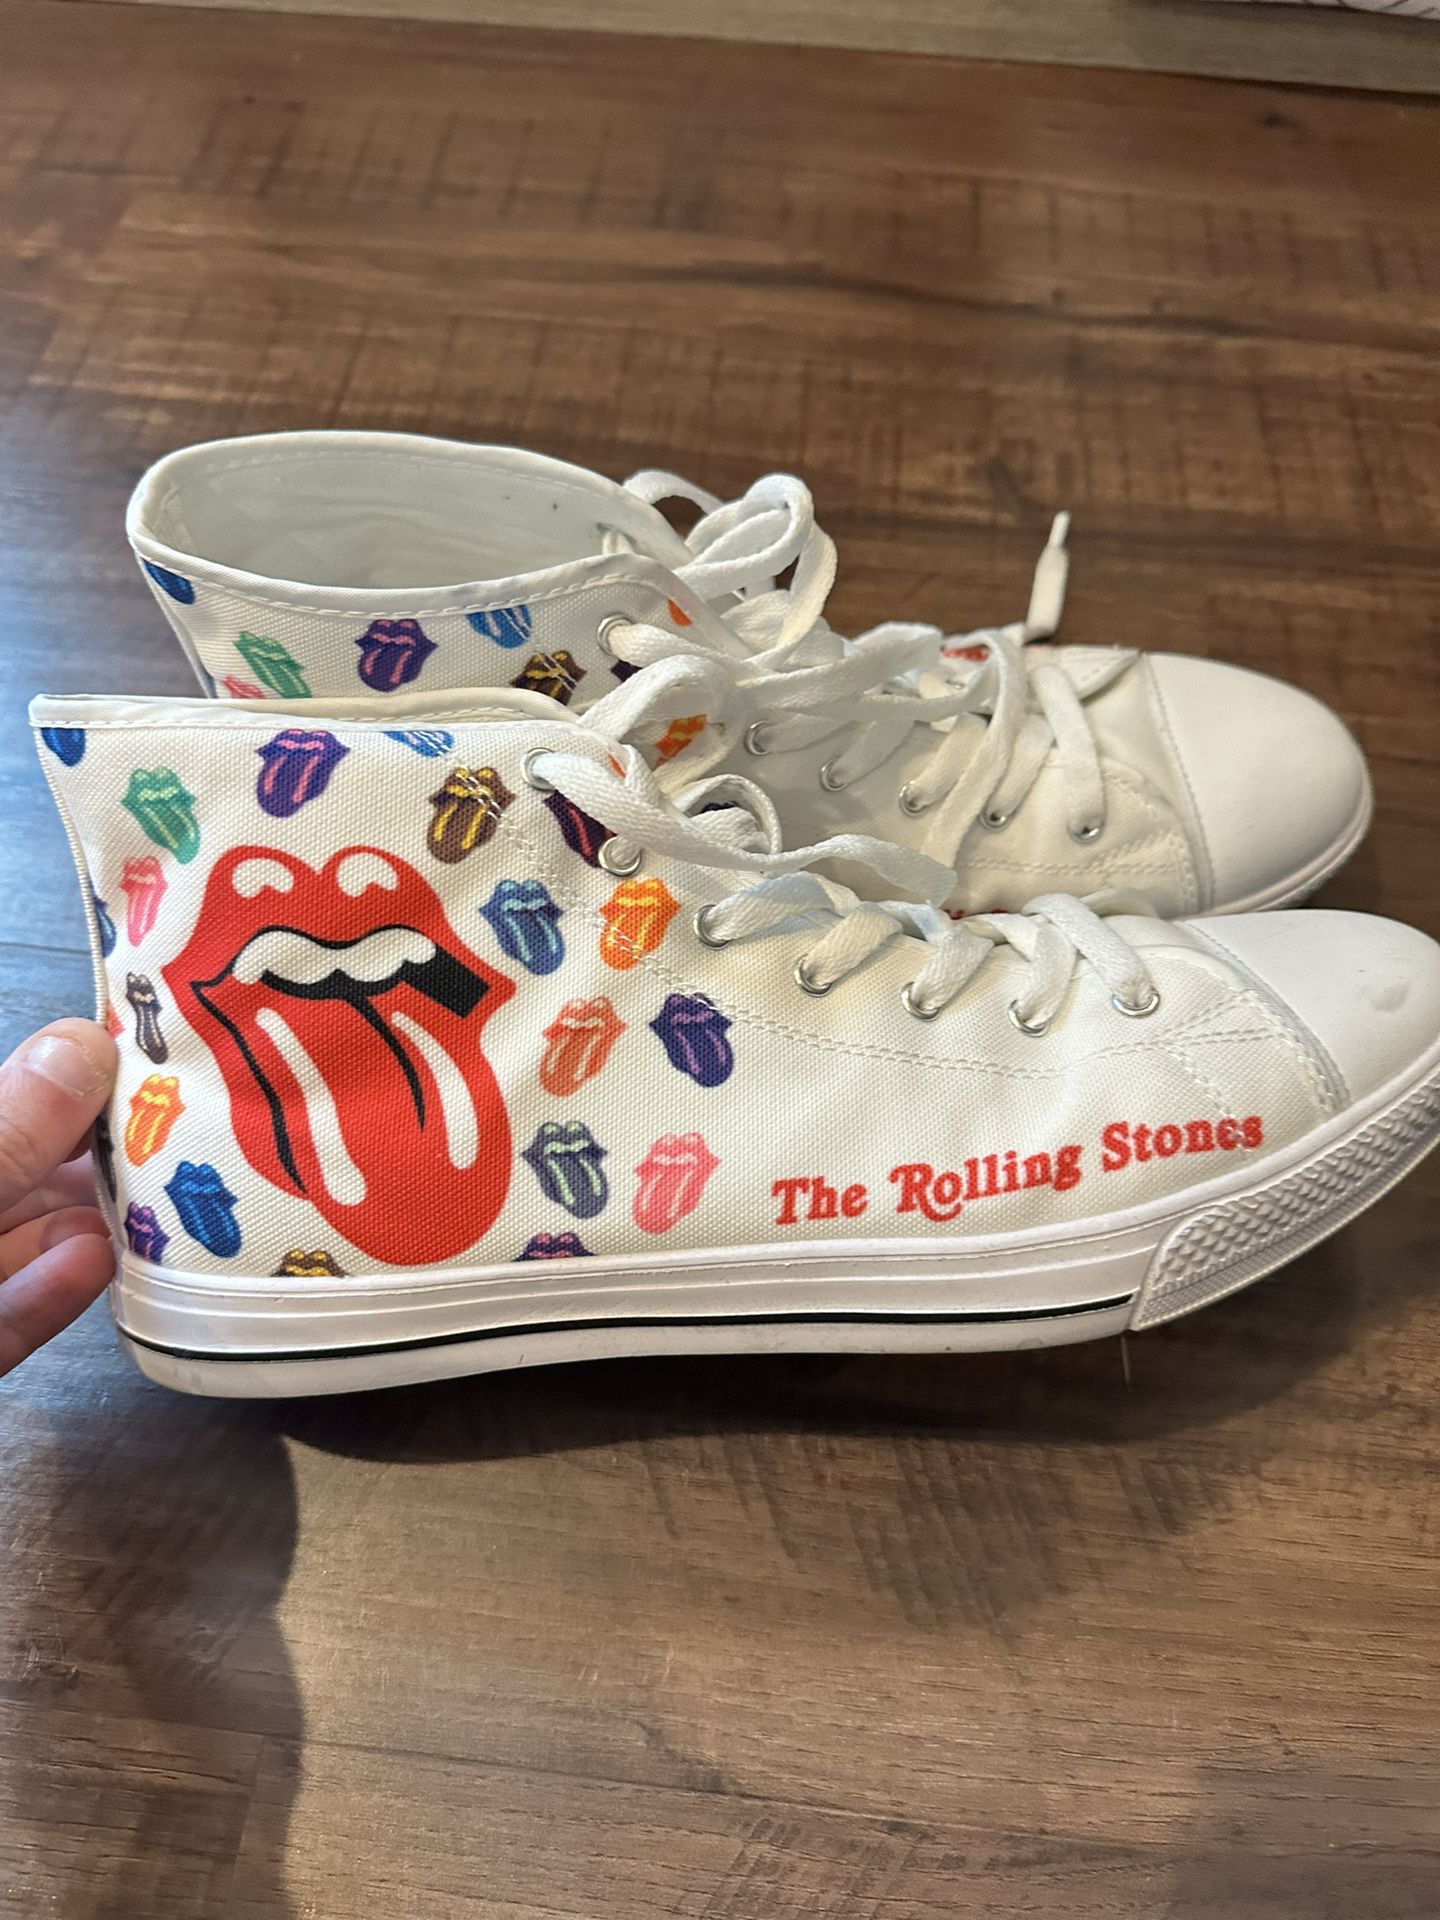 Amazing Rolling Stones shoes 